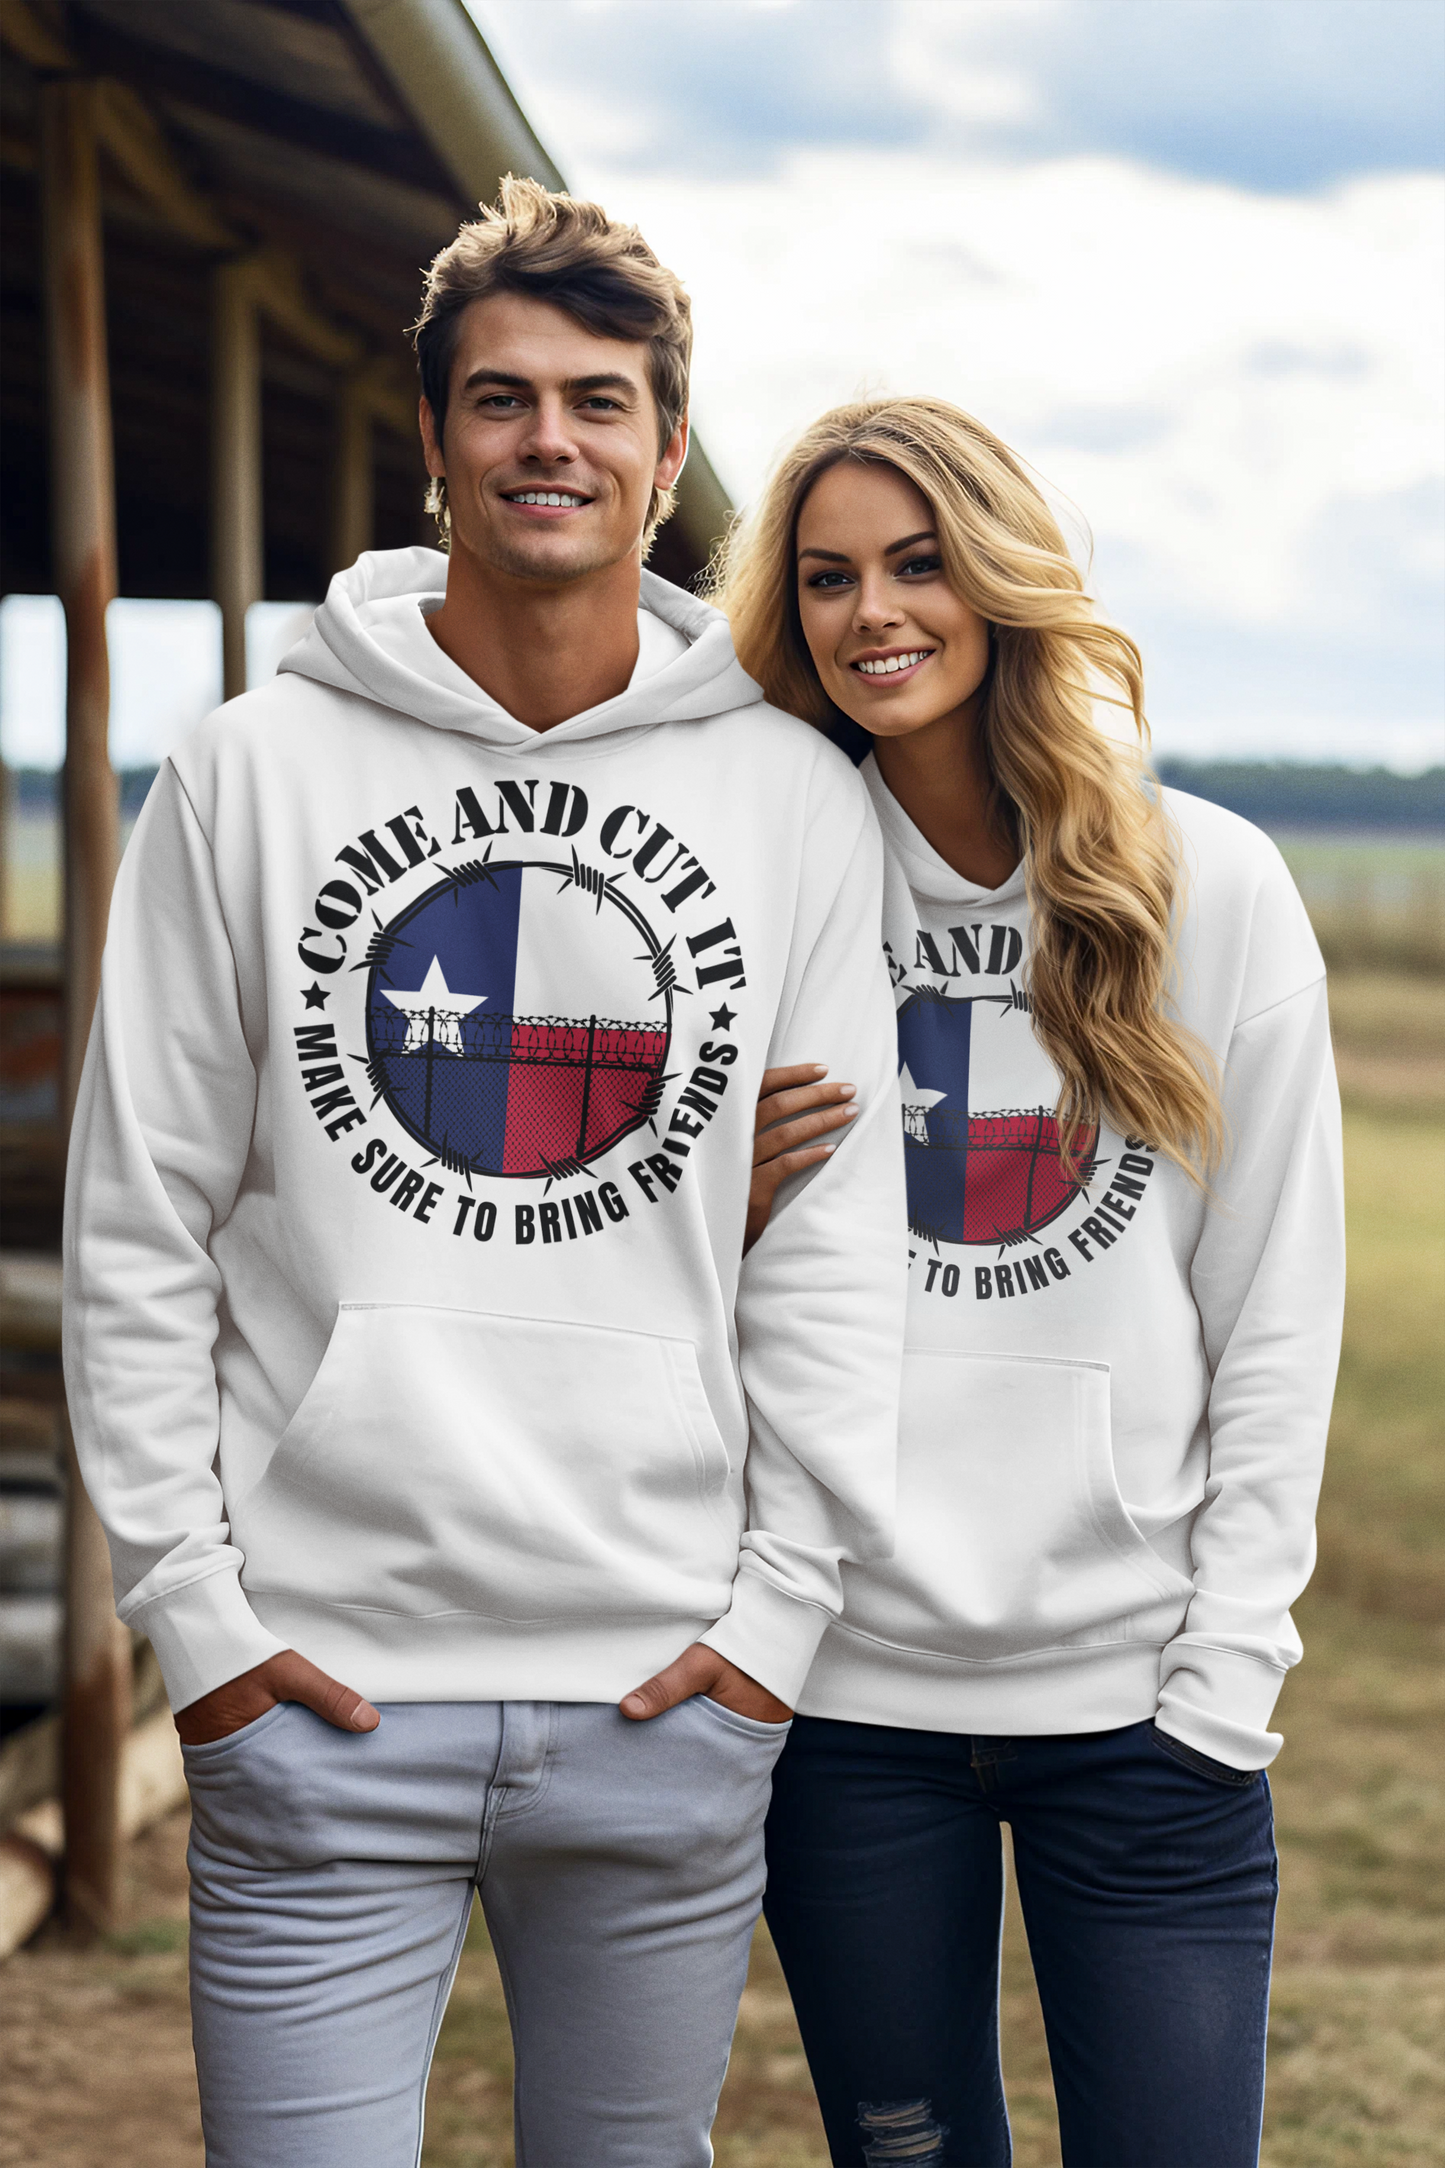 Classic Hoodie  Texas "Come and Cut it"  Better Bring Friends"